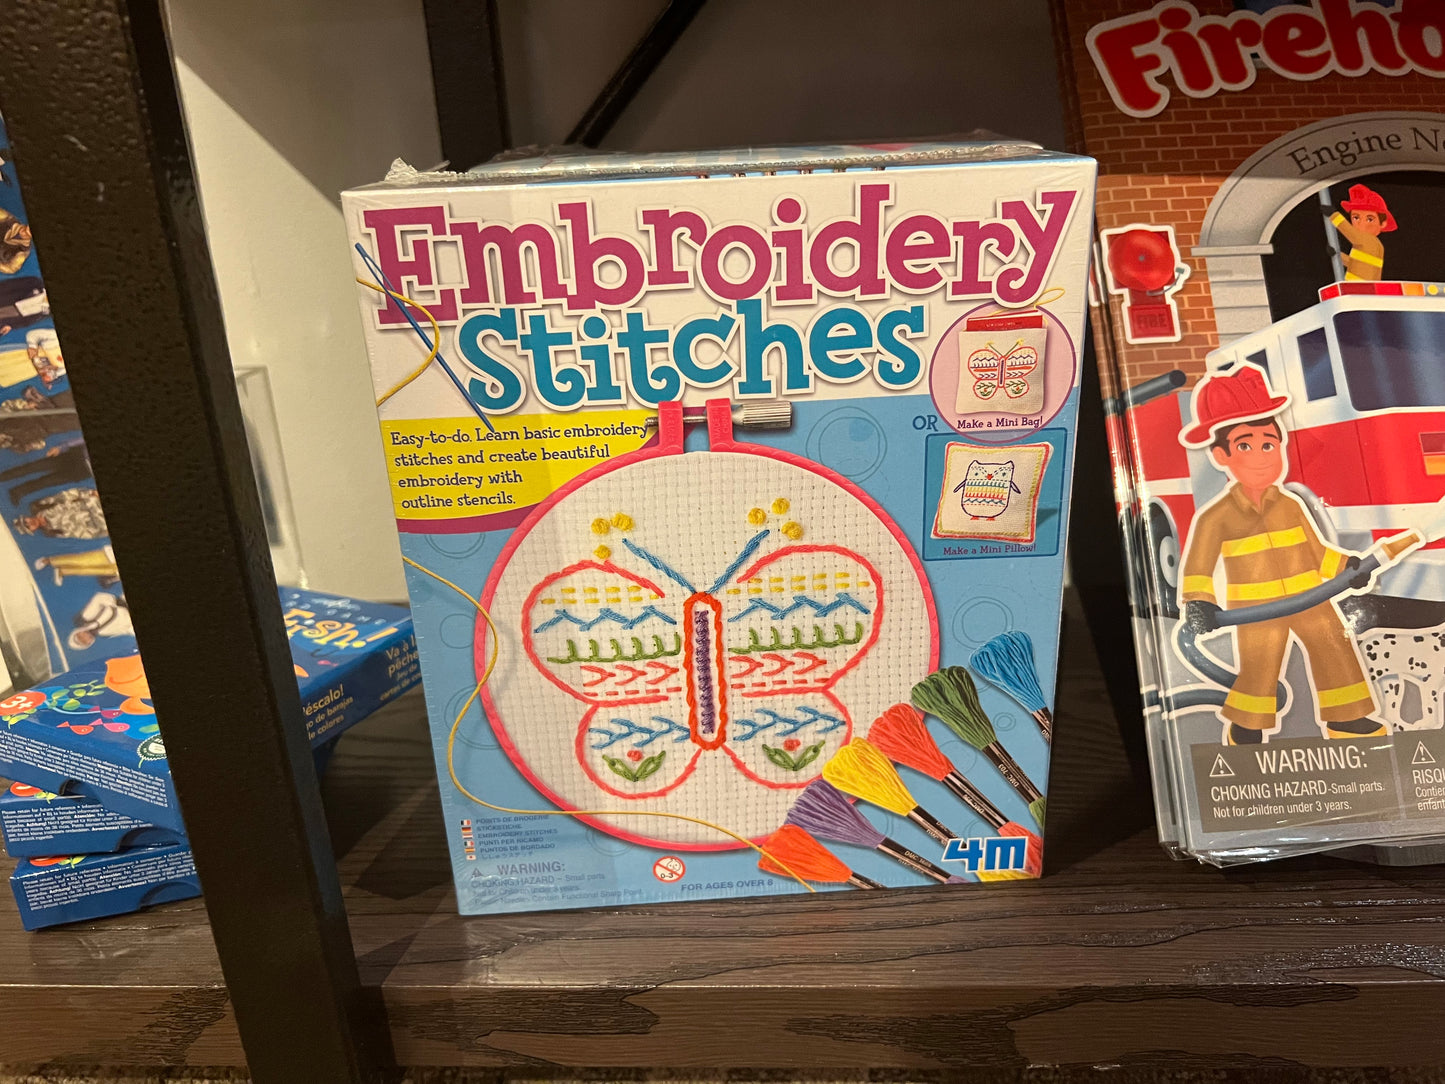 Embroidery Stitches Kit